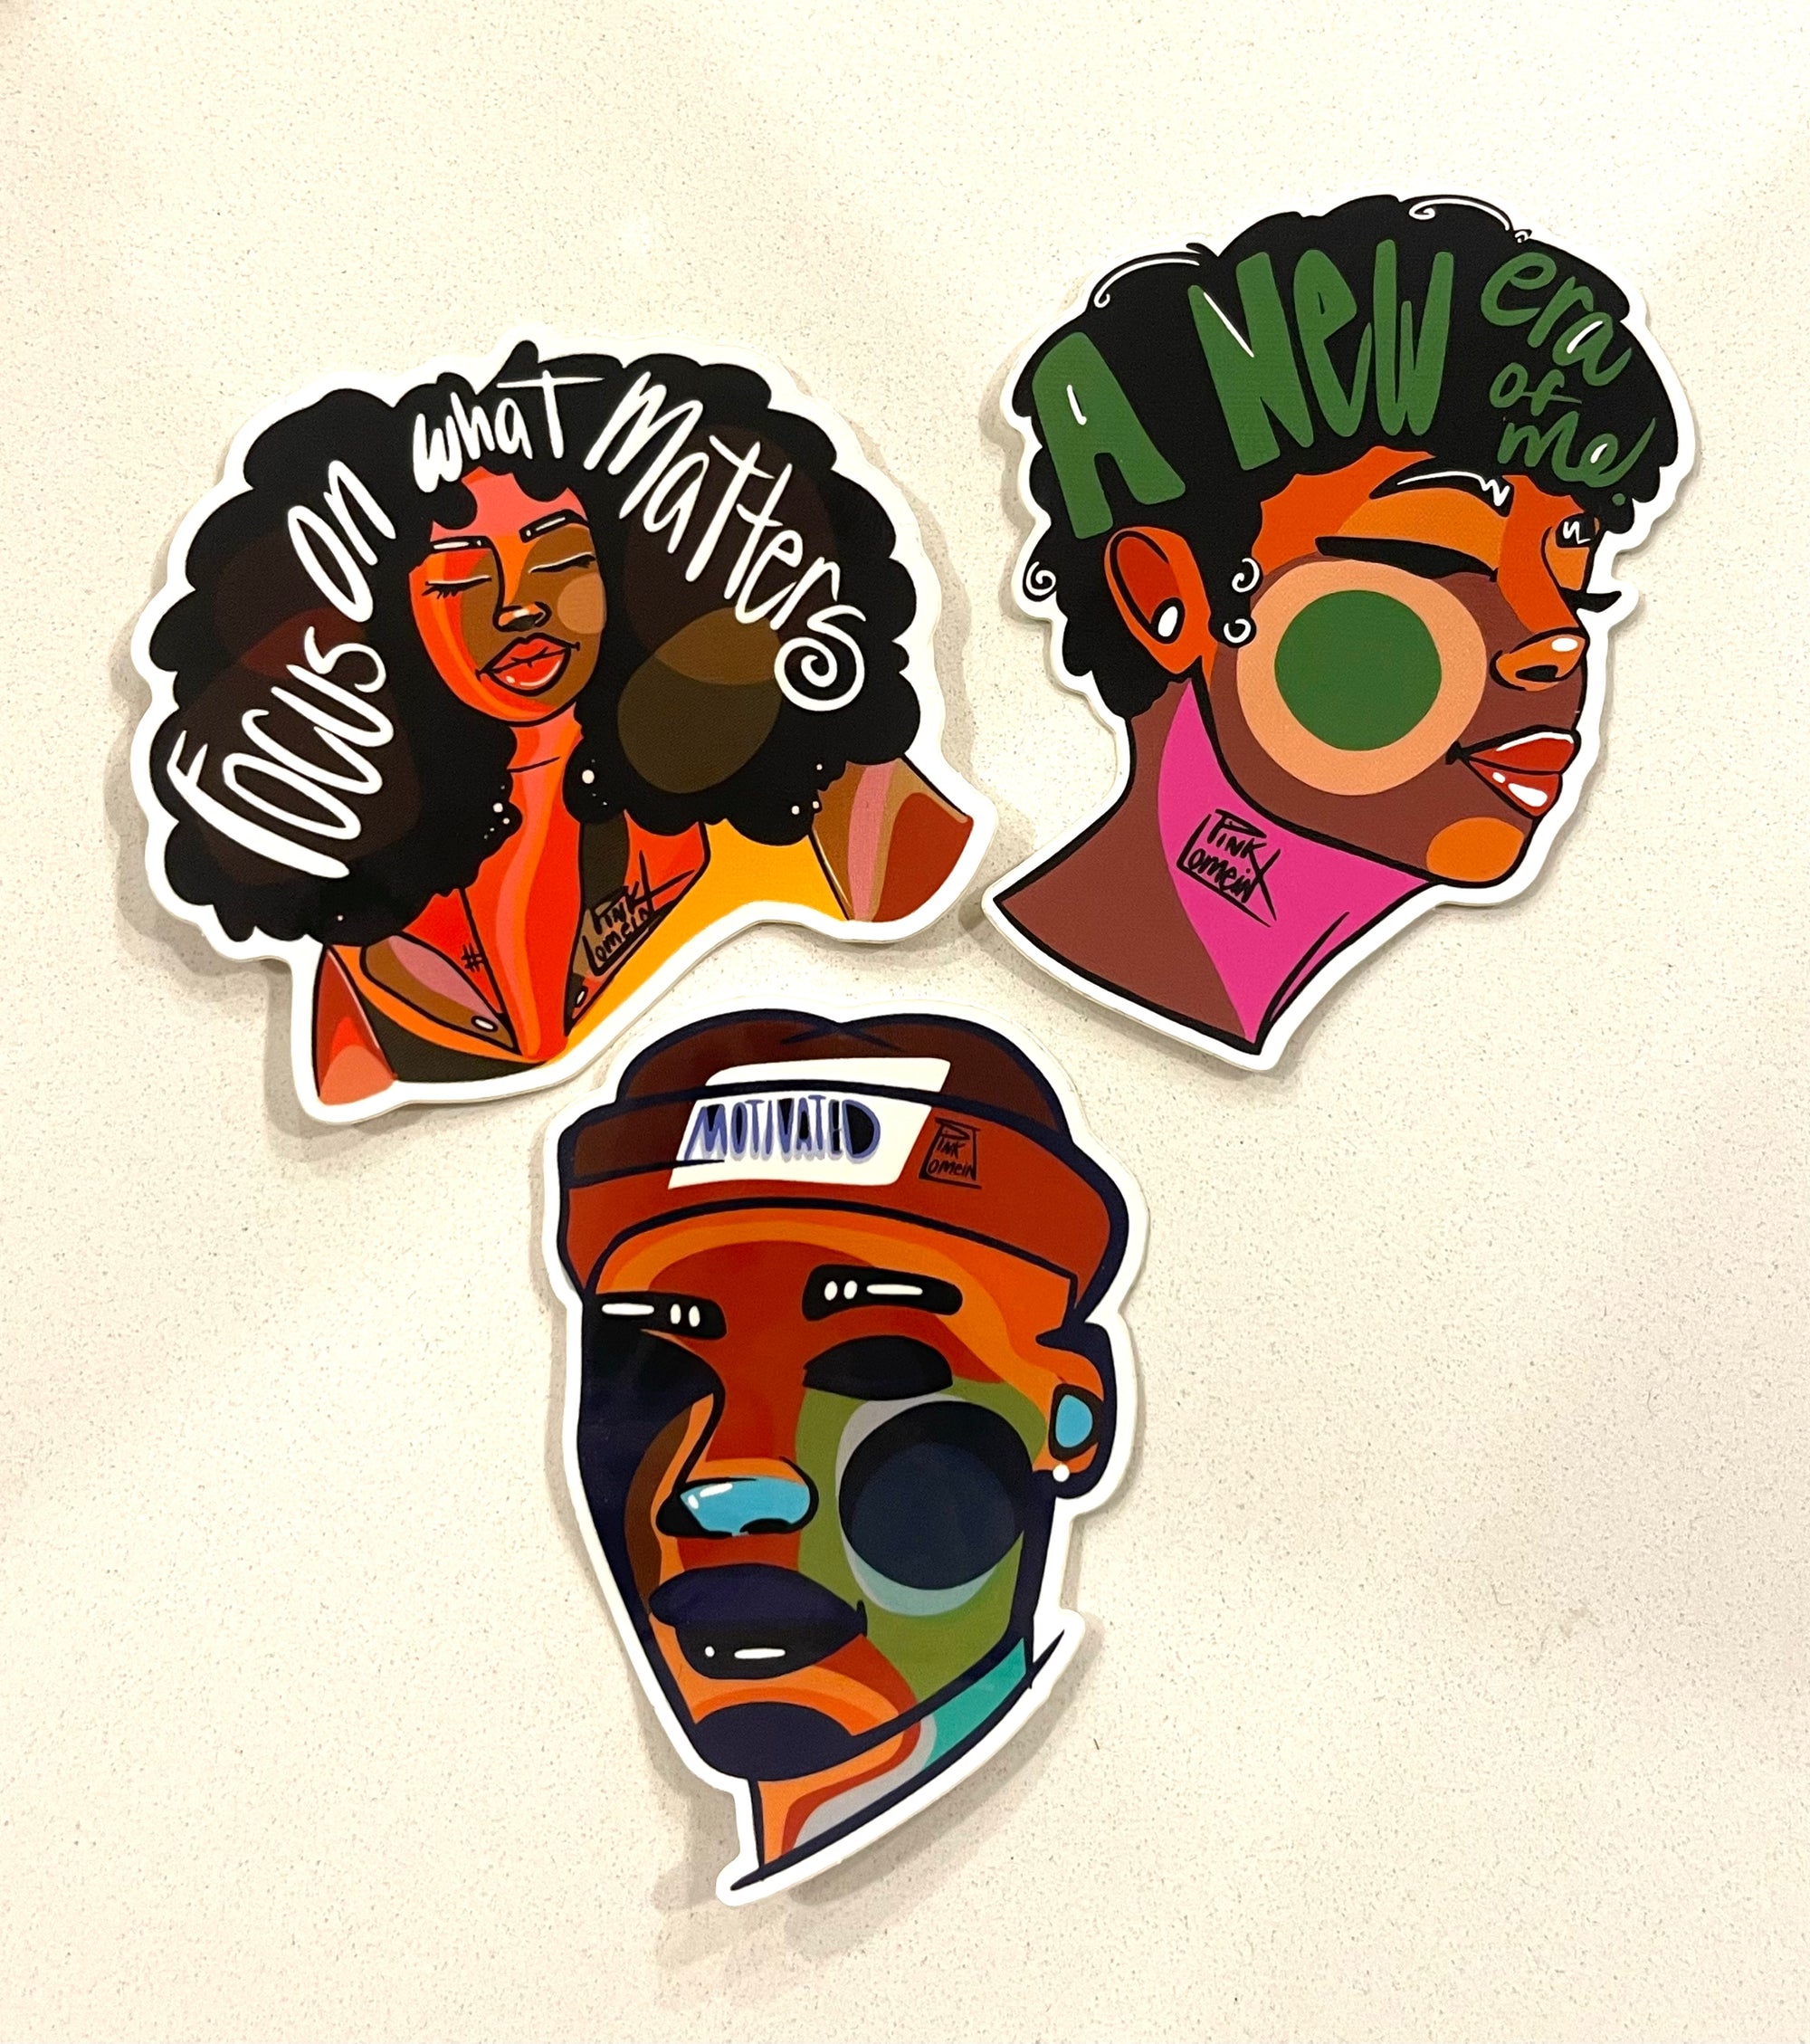 A New Era, Focus, and Motivated Vinyl Sticker Pack